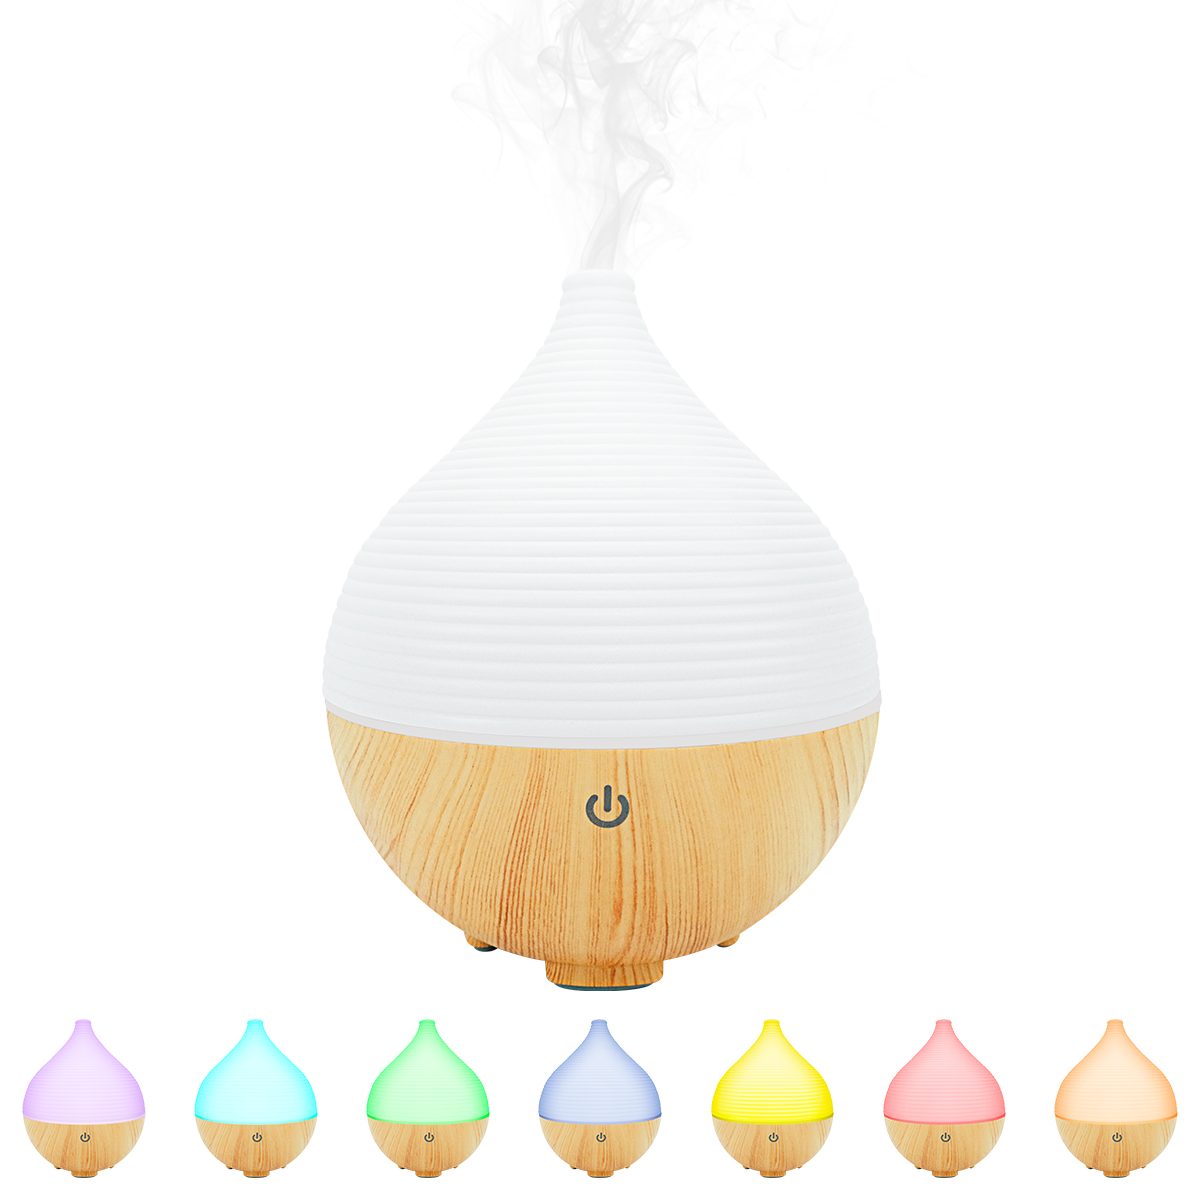 Essential Oil Cool Mist Diffuser, 160ml Mini Aromatherapy Home Diffuser 3 Mode with LED Light Up to 7 Hours Run time Quiet Humidifier USB 5V Powered/Auto-Off Function